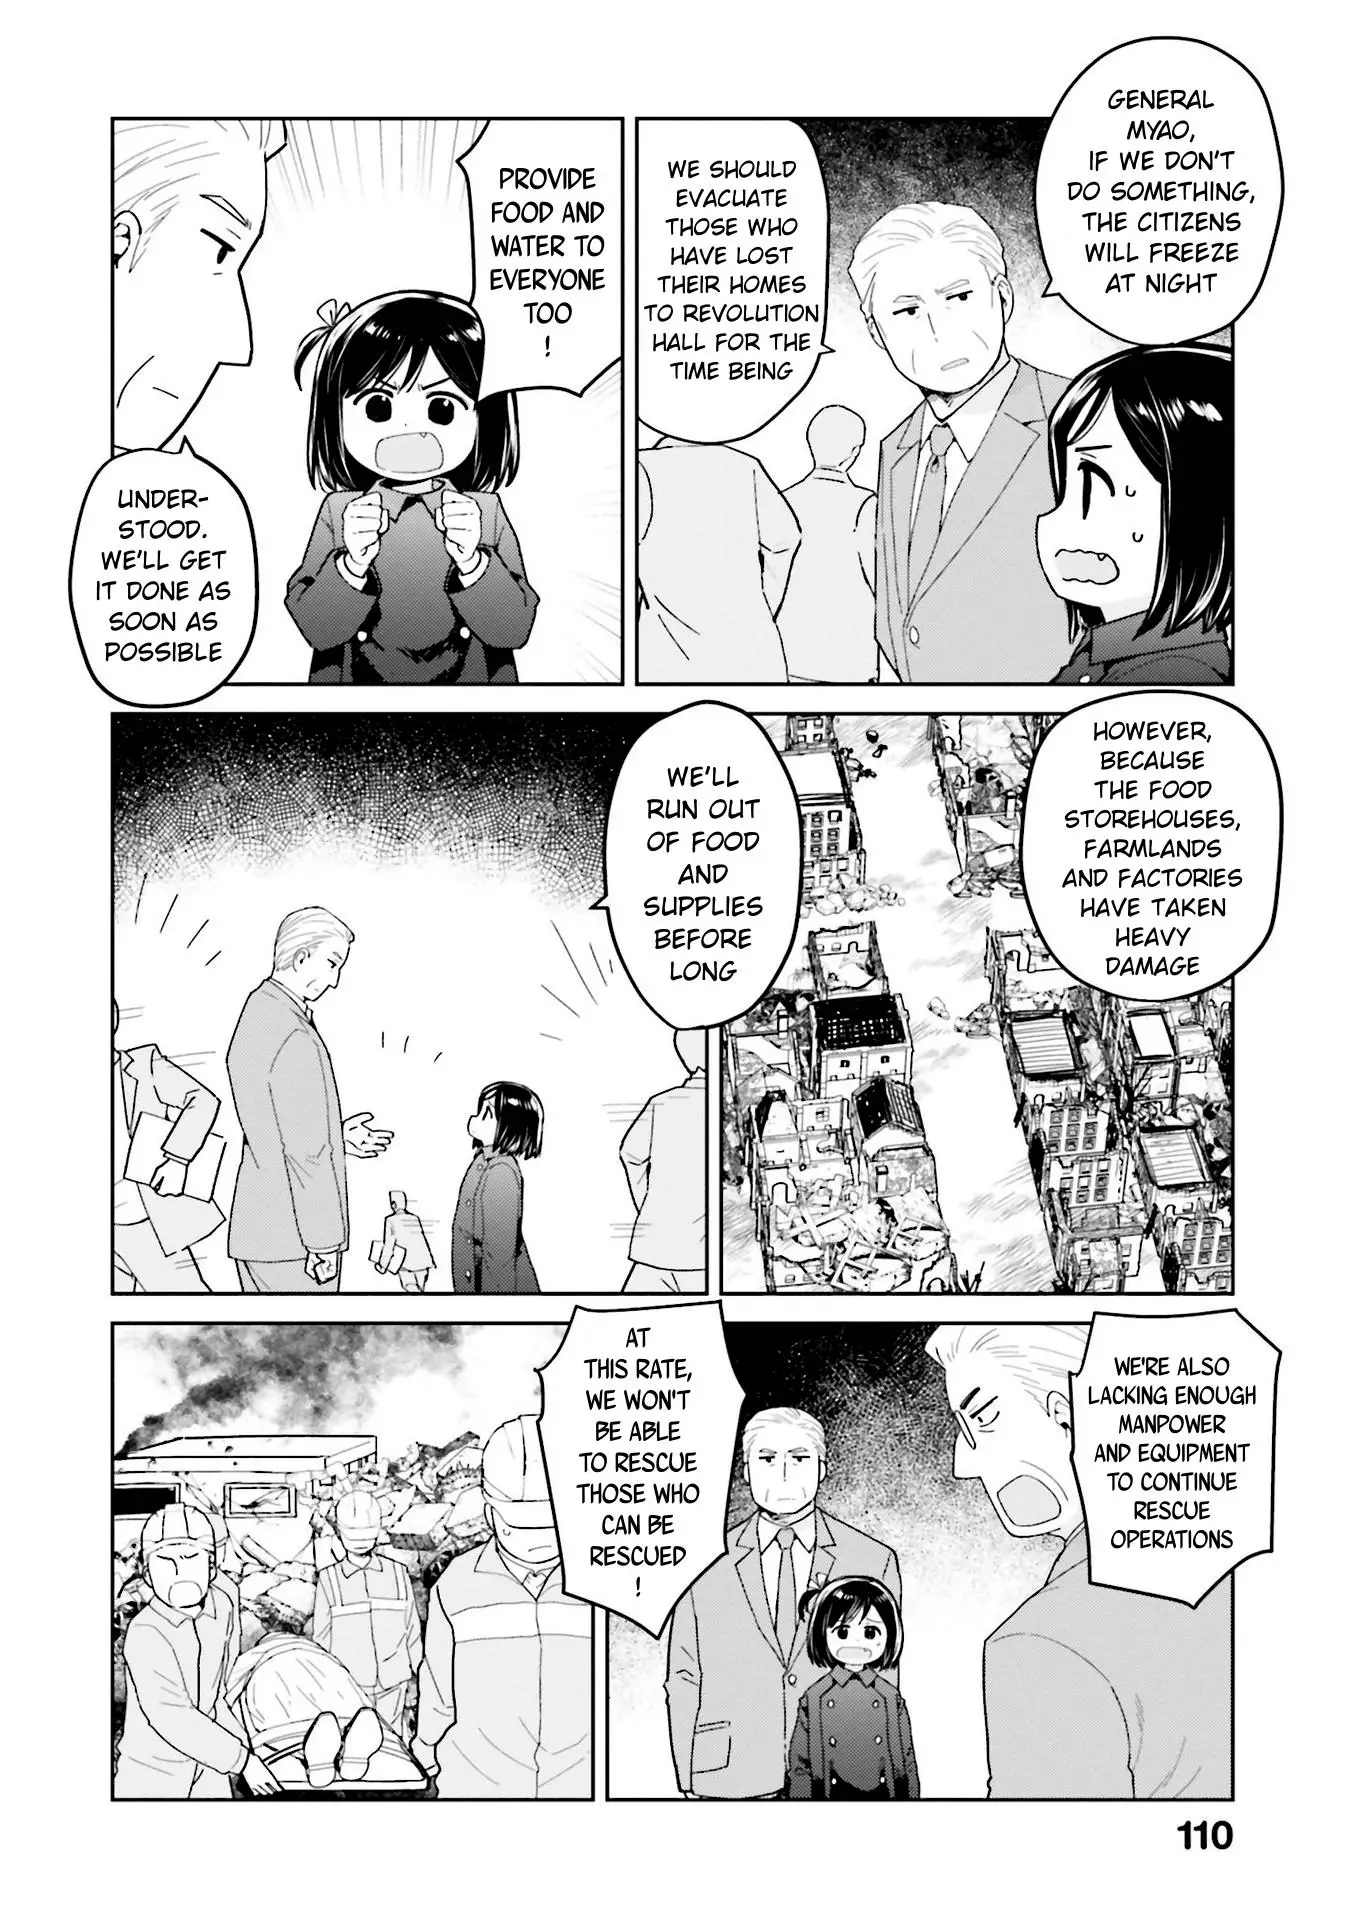 Oh, Our General Myao - 47 page 8-41dbd54a